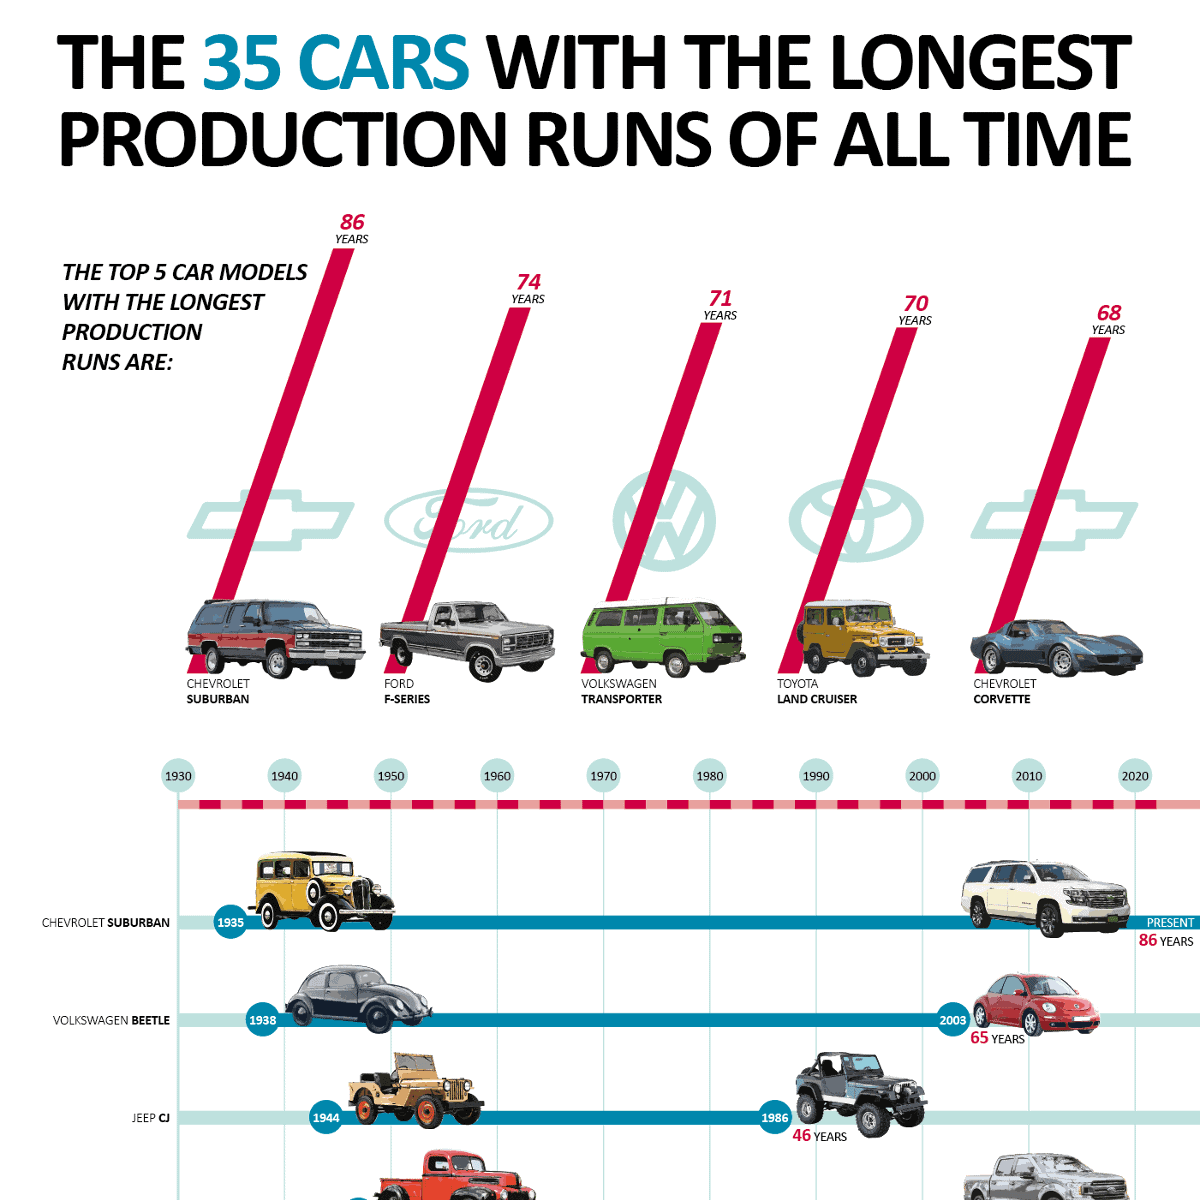 The 35 Cars With the Longest Production Runs of All Time